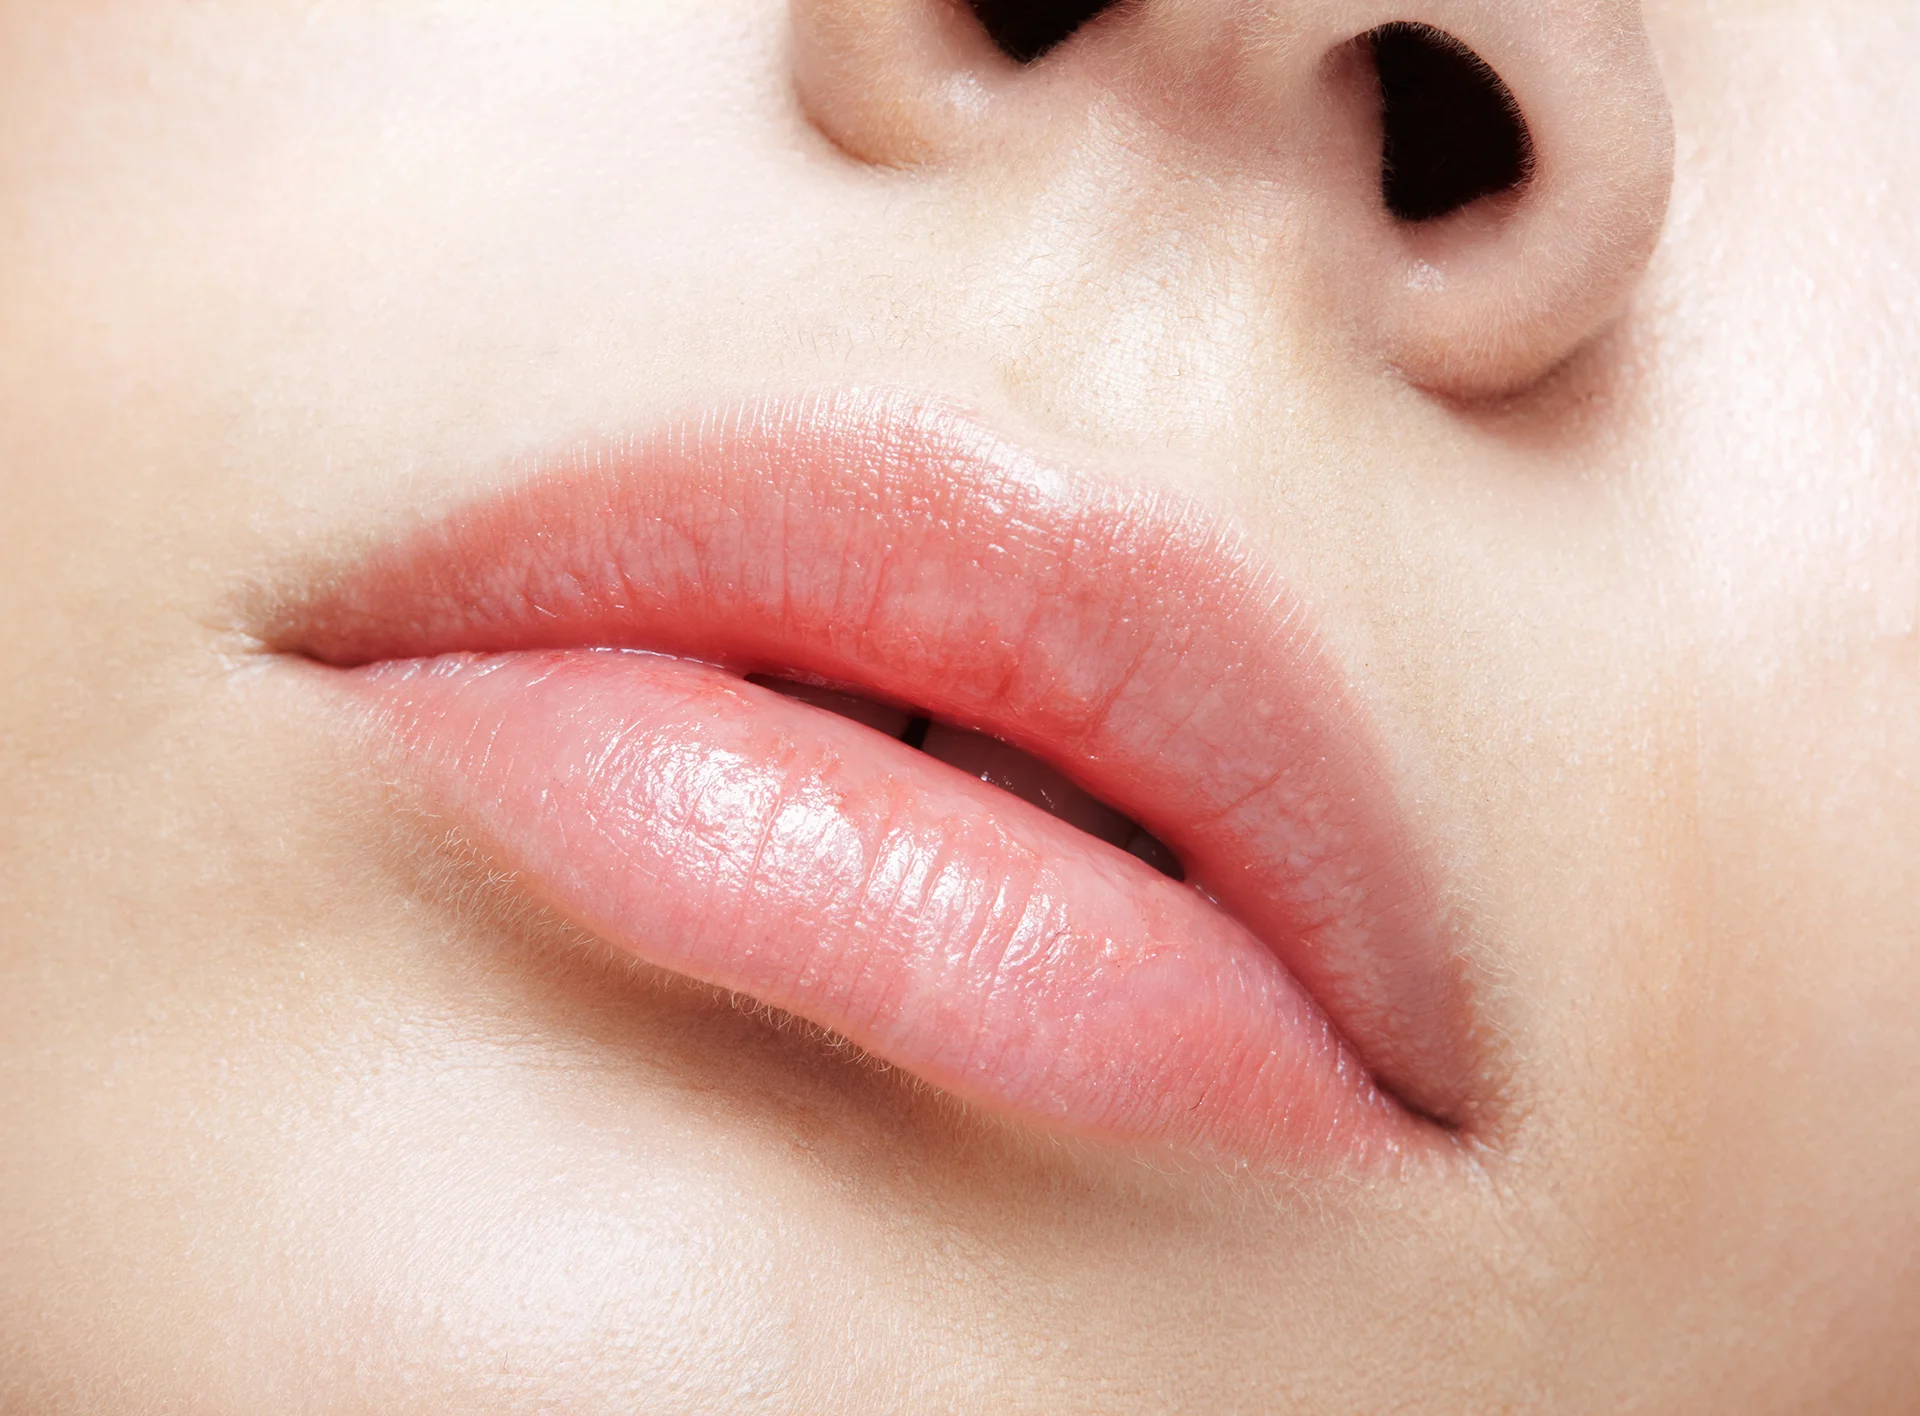 a portrait of a woman with plump lips|a woman applies lip balm on her lips|a woman receives lip filler injections